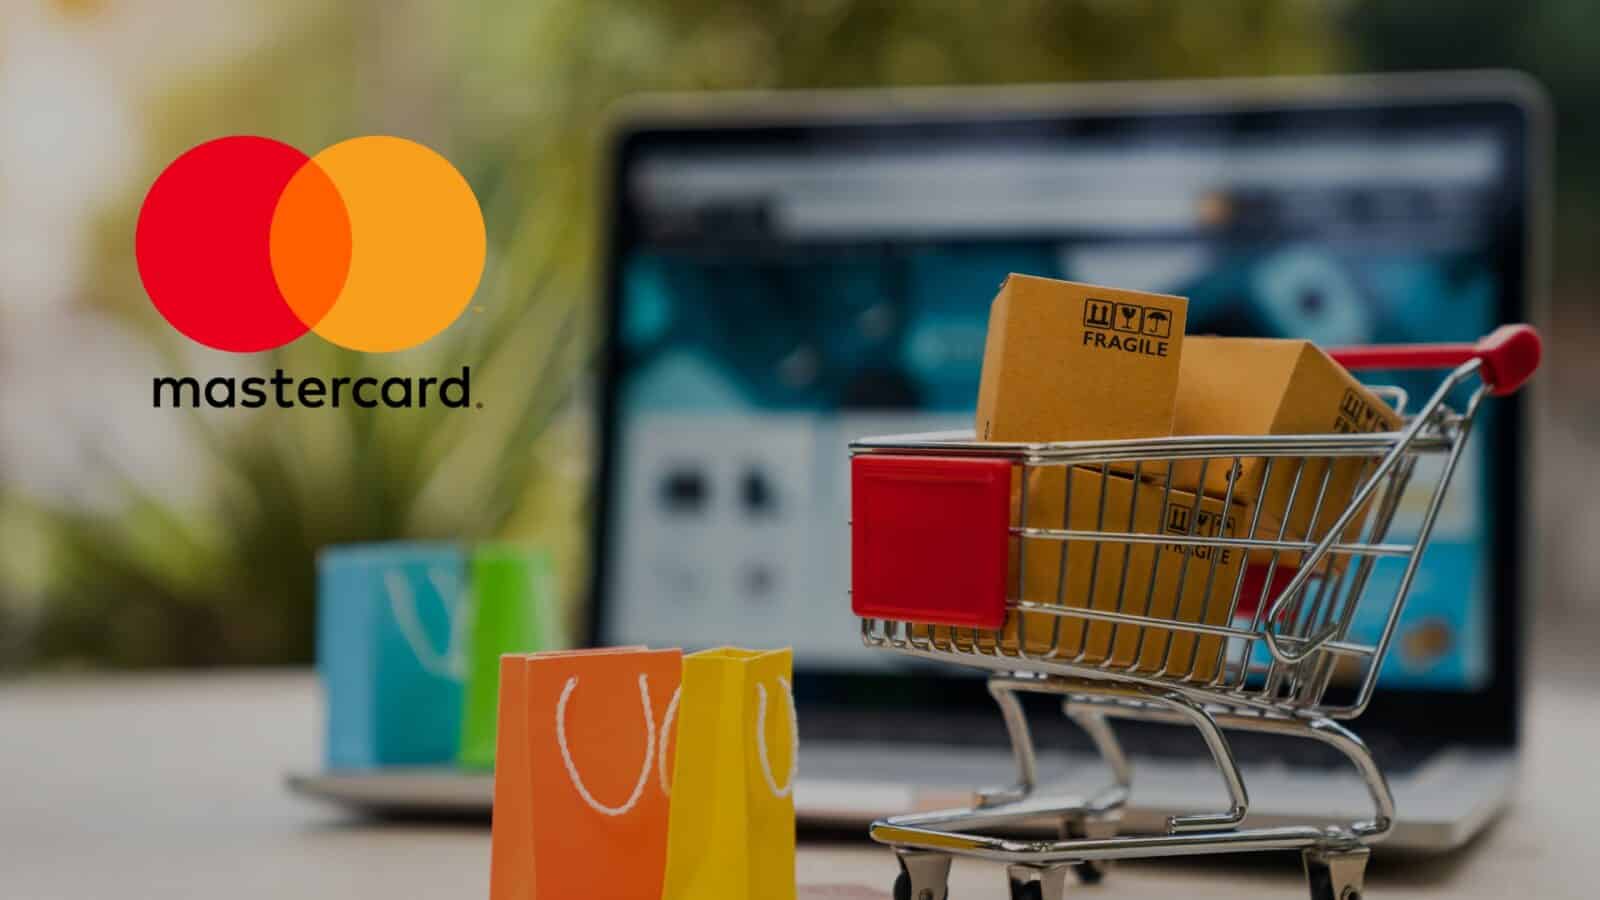 Mastercard's Shopping Muse - Revolutionizing Retail with AI